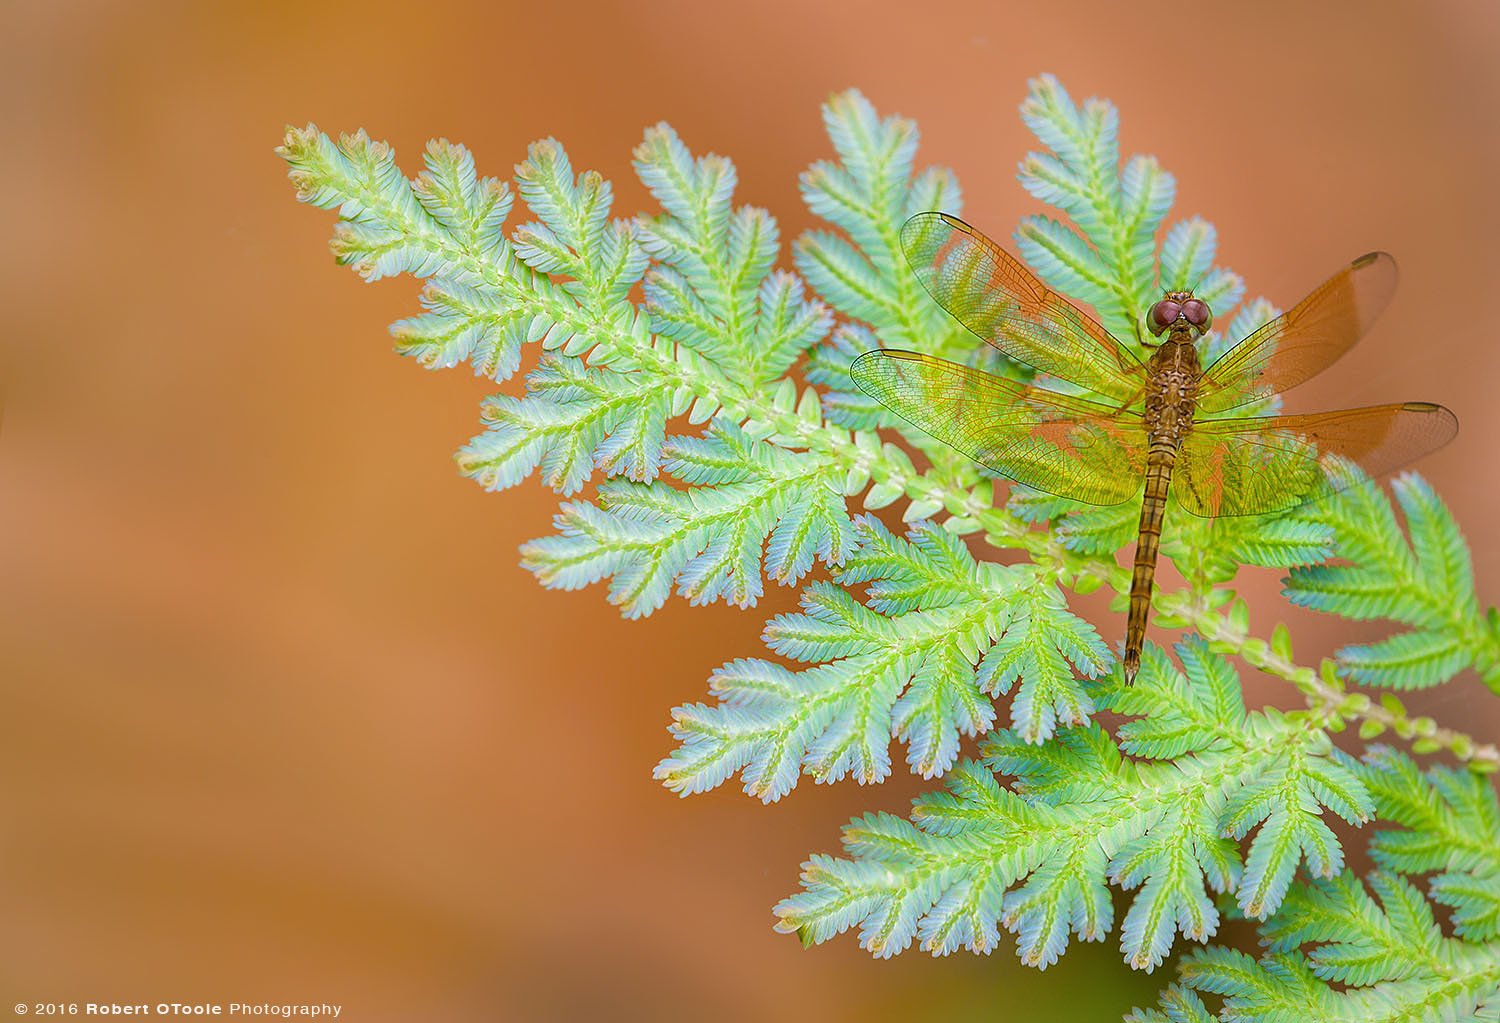 Common Parasol Dragonfly Resting on Peacock Fern